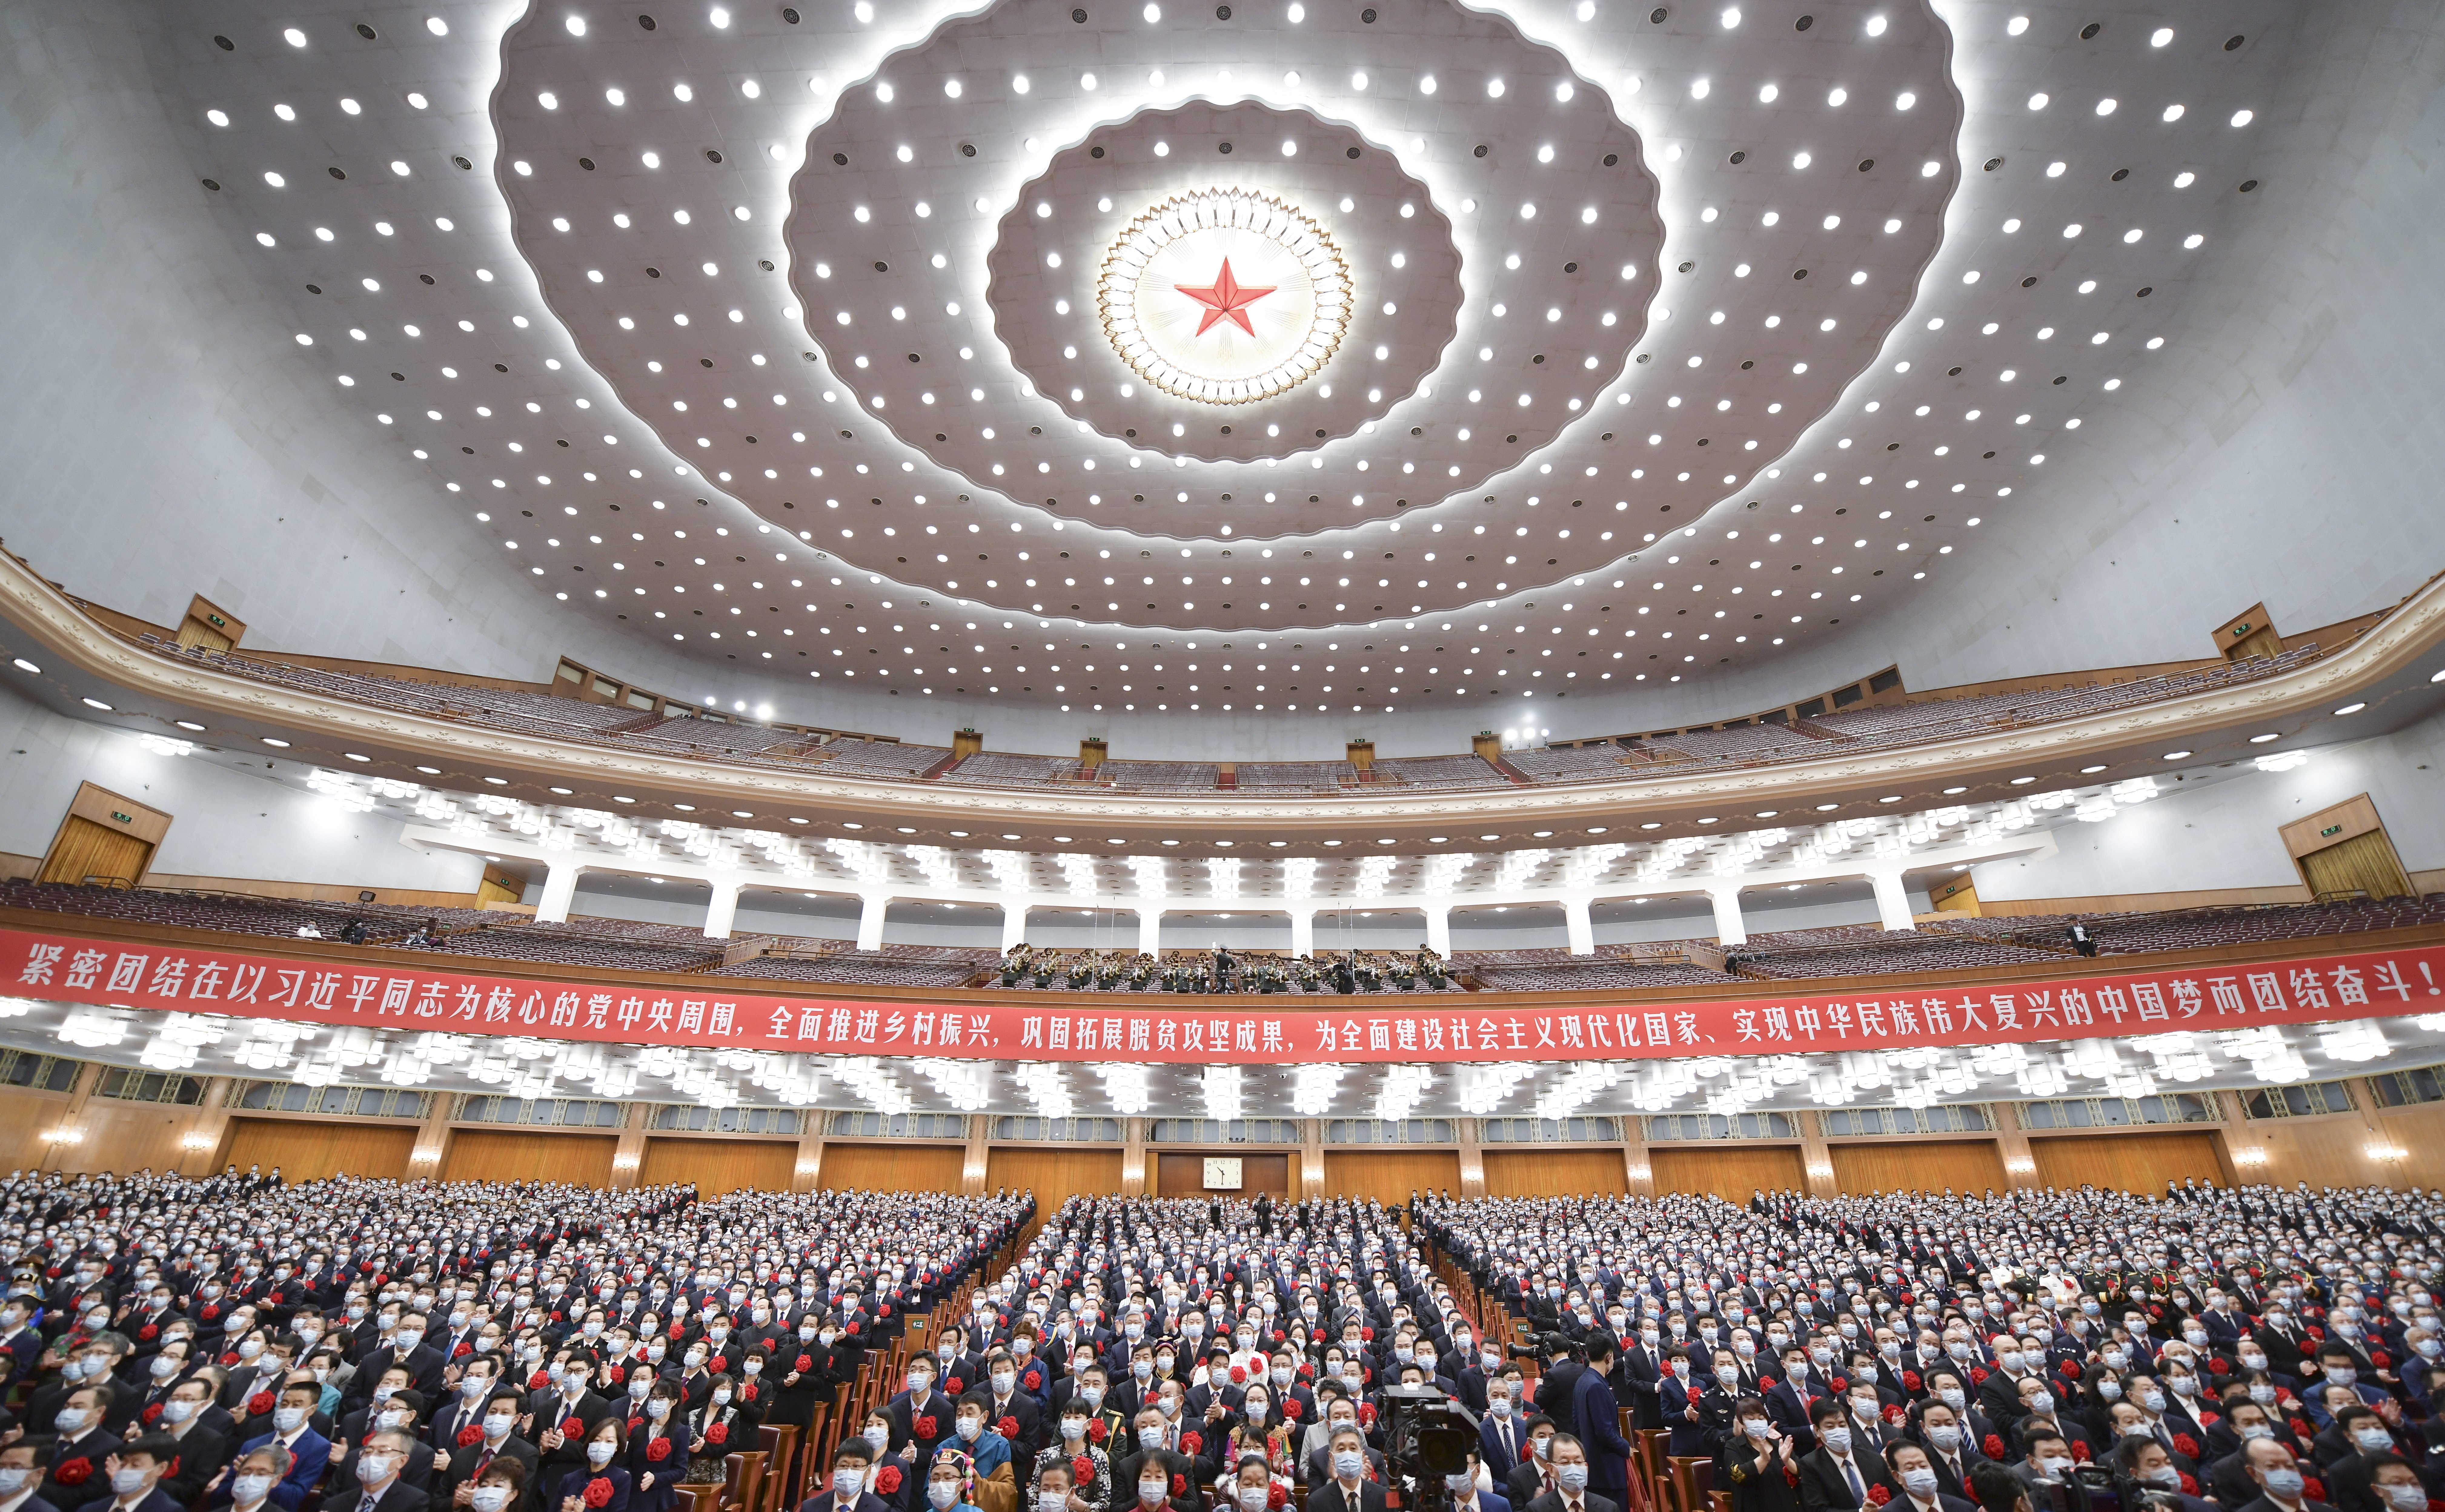 China marks its accomplishments in poverty alleviation and honours its poverty fighters at the Great Hall of the People in Beijing, on February 25. Photo: Xinhua